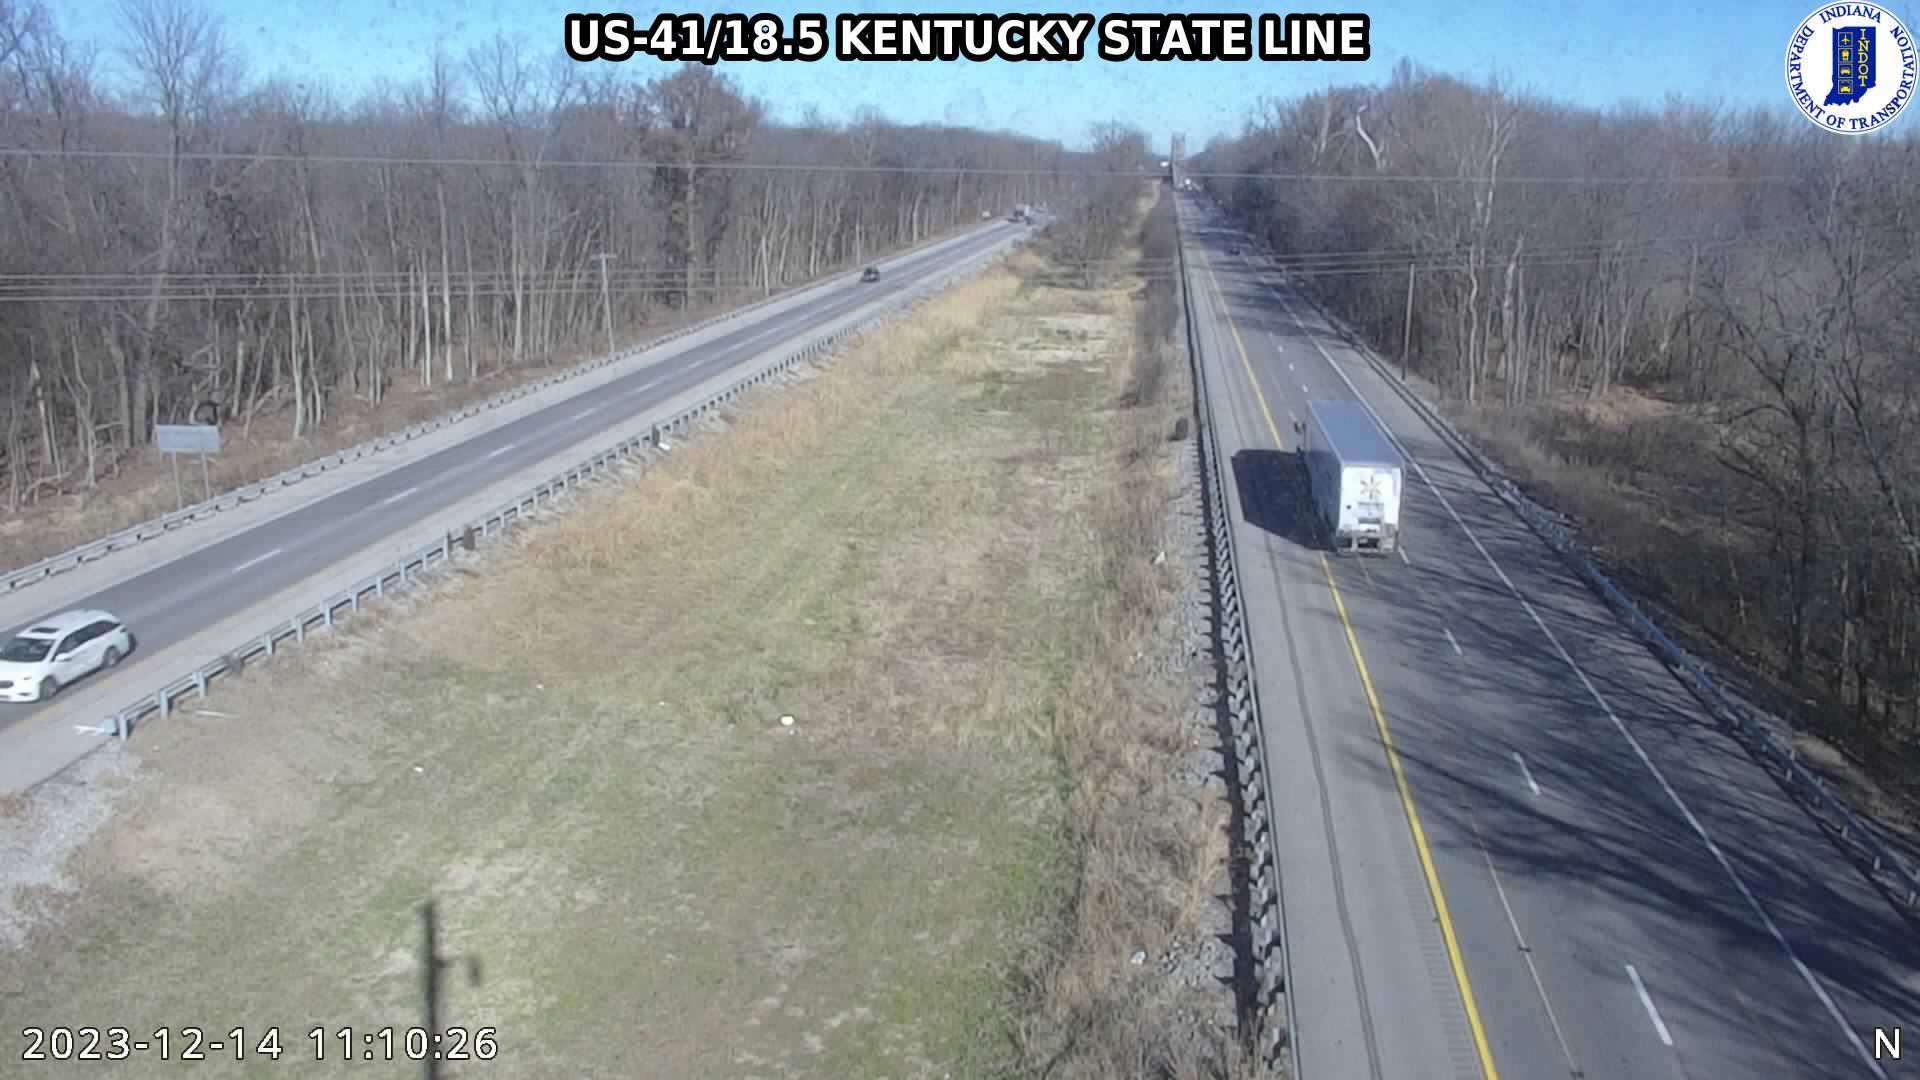 Henderson: KY US-41: US-41/18.5 - STATE LINE: US-41/18.5 - STATE LINE Traffic Camera